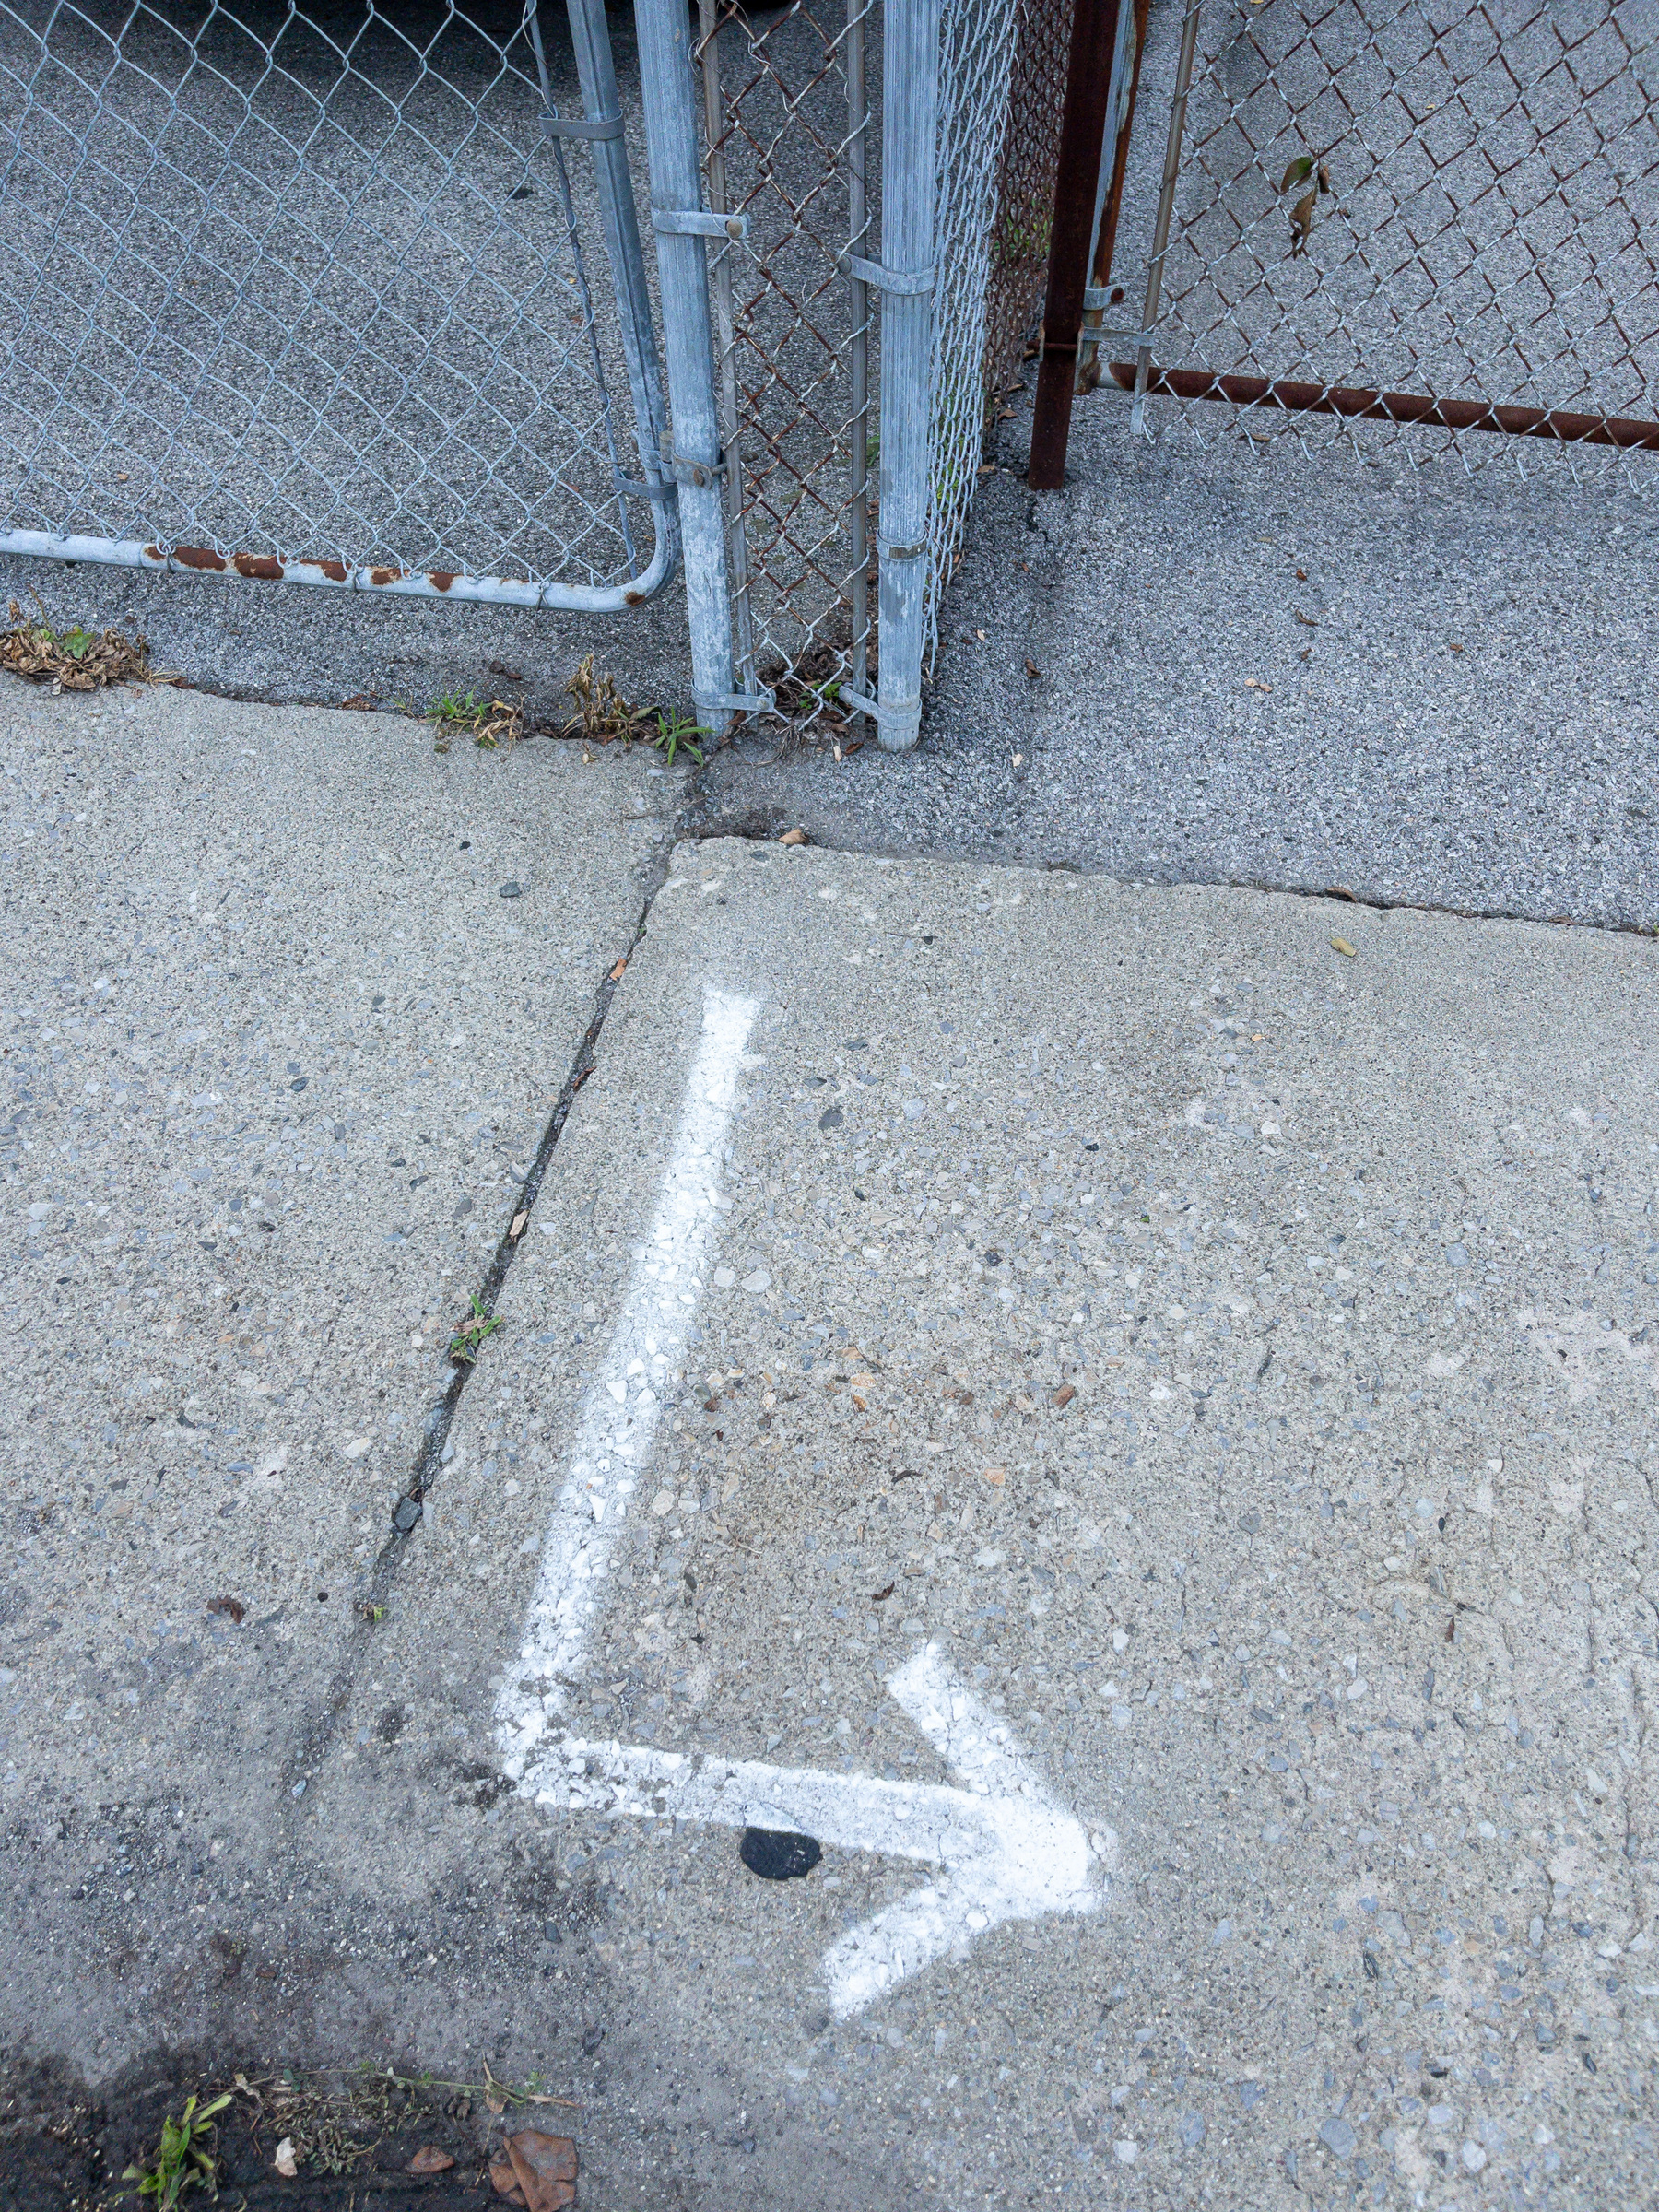 Right turn arrow painted on a sidewalk, chainlink fencing in background.